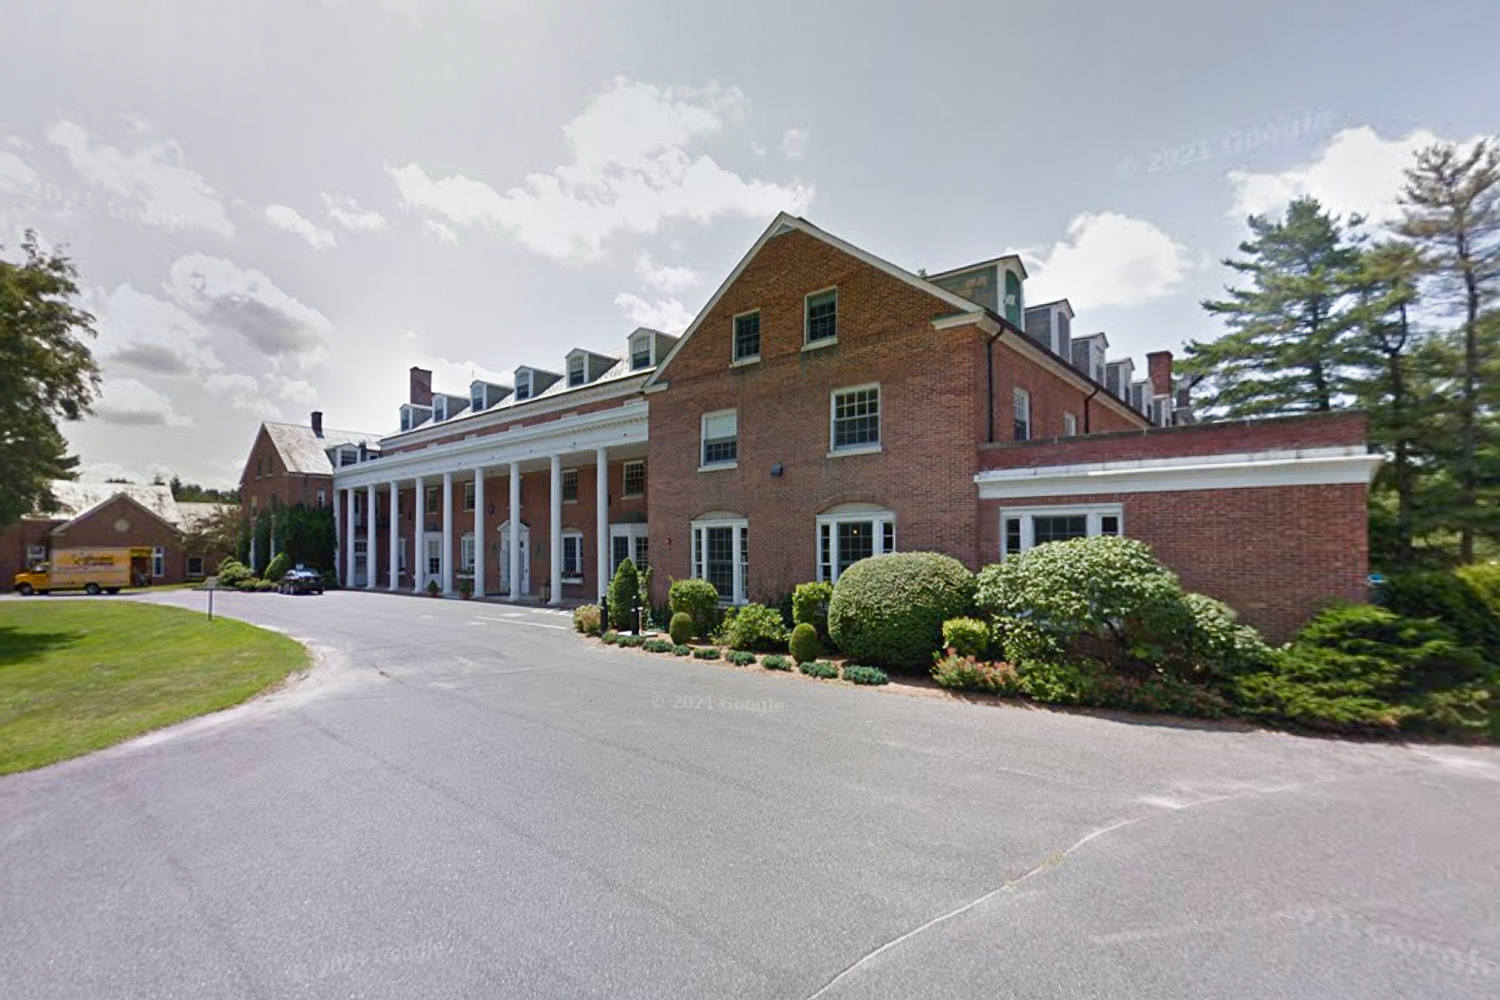 Teacher at New England boarding school accused of preying on female students